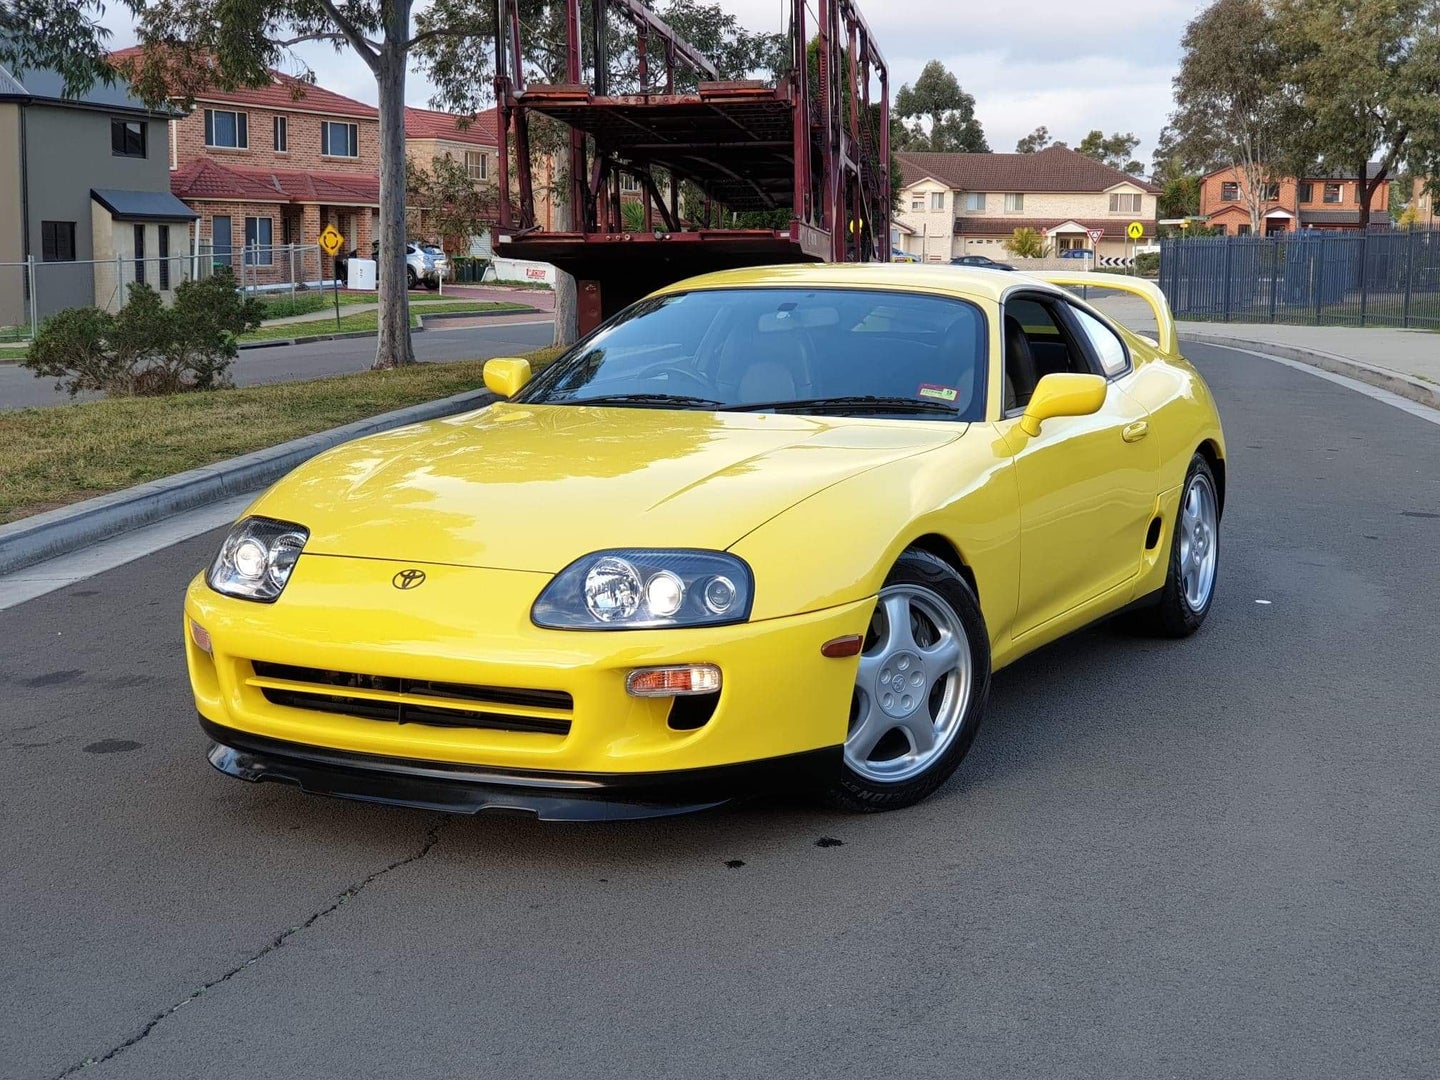 This May Be One of the Rarest Toyota Supras on Earth